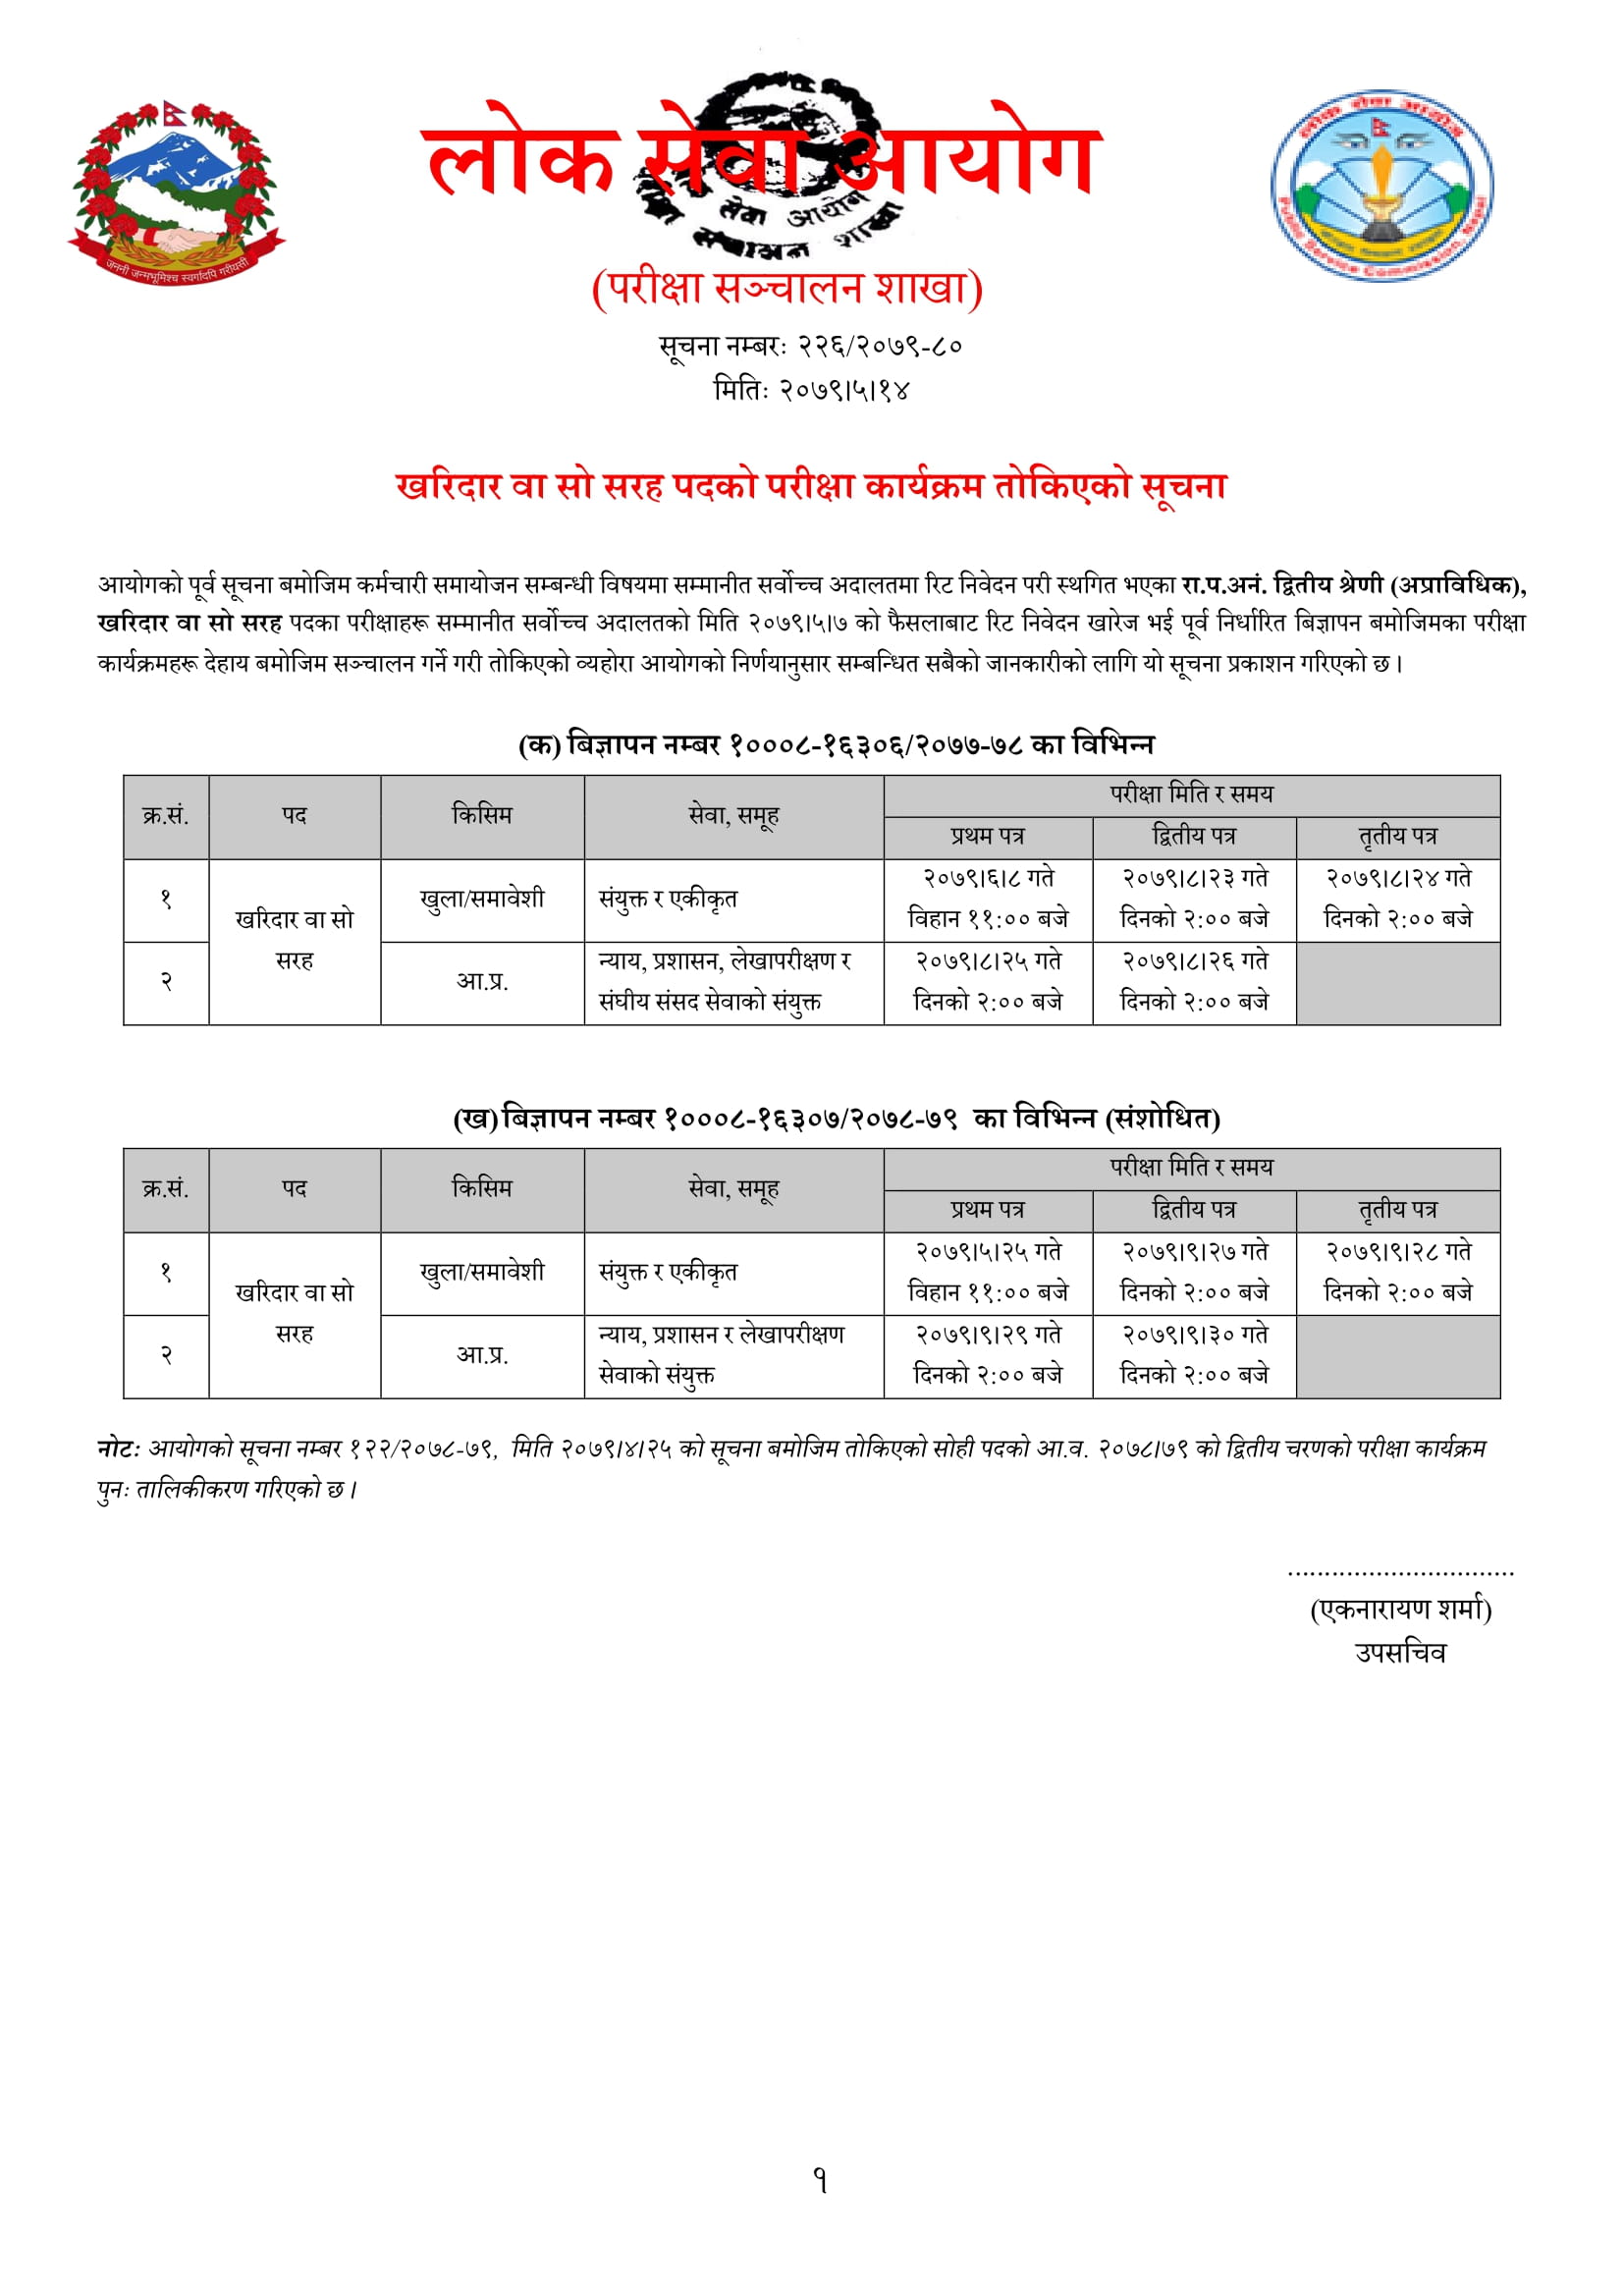 Exam Program Is Published For Kharidar or Equivalant Post of PSC 2079